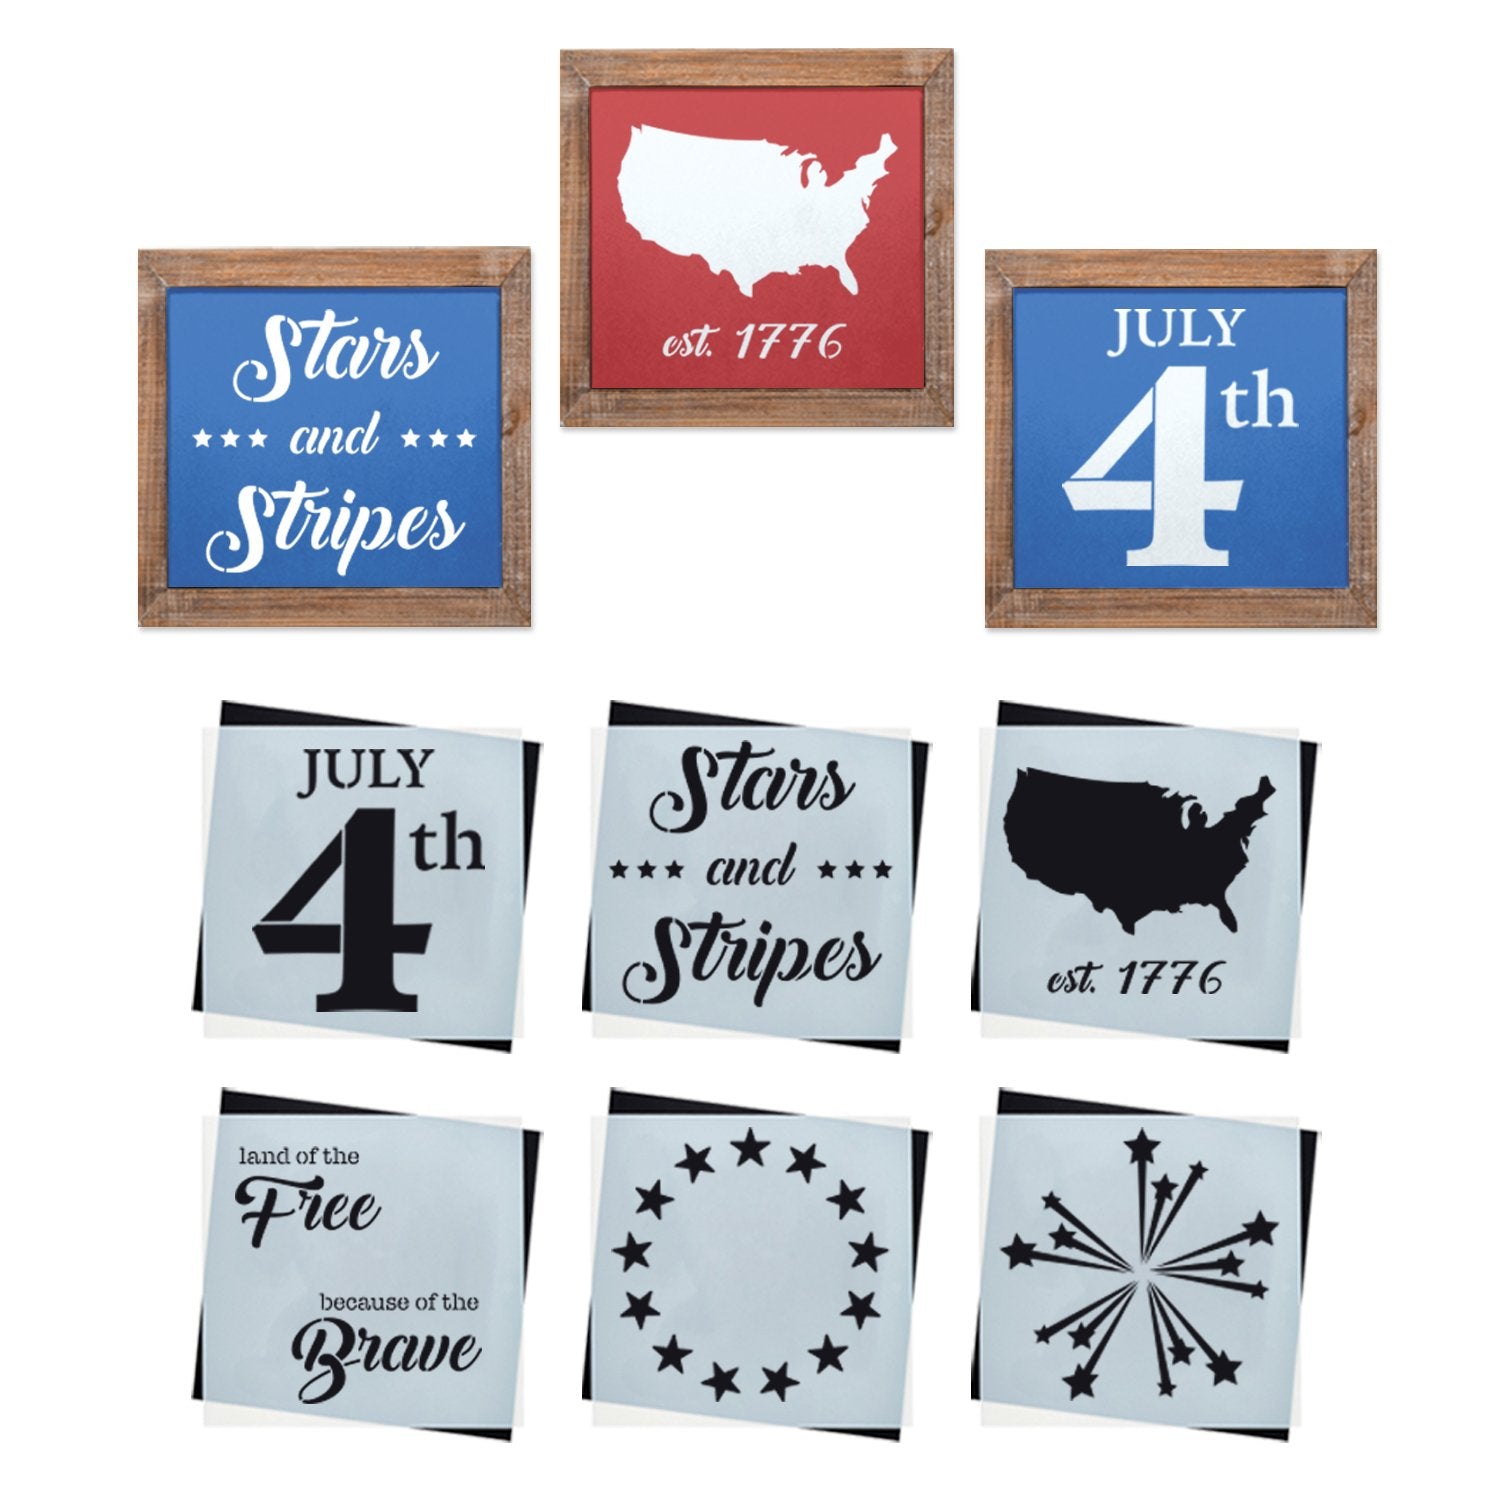 Reusable Patriotic sign stencils for painting on wood, DIY 4th of July home decor, July 4th, Stars and stripes, USA, United States silhouette, Betsy ross 13 star, land of the free because of the brave stencil